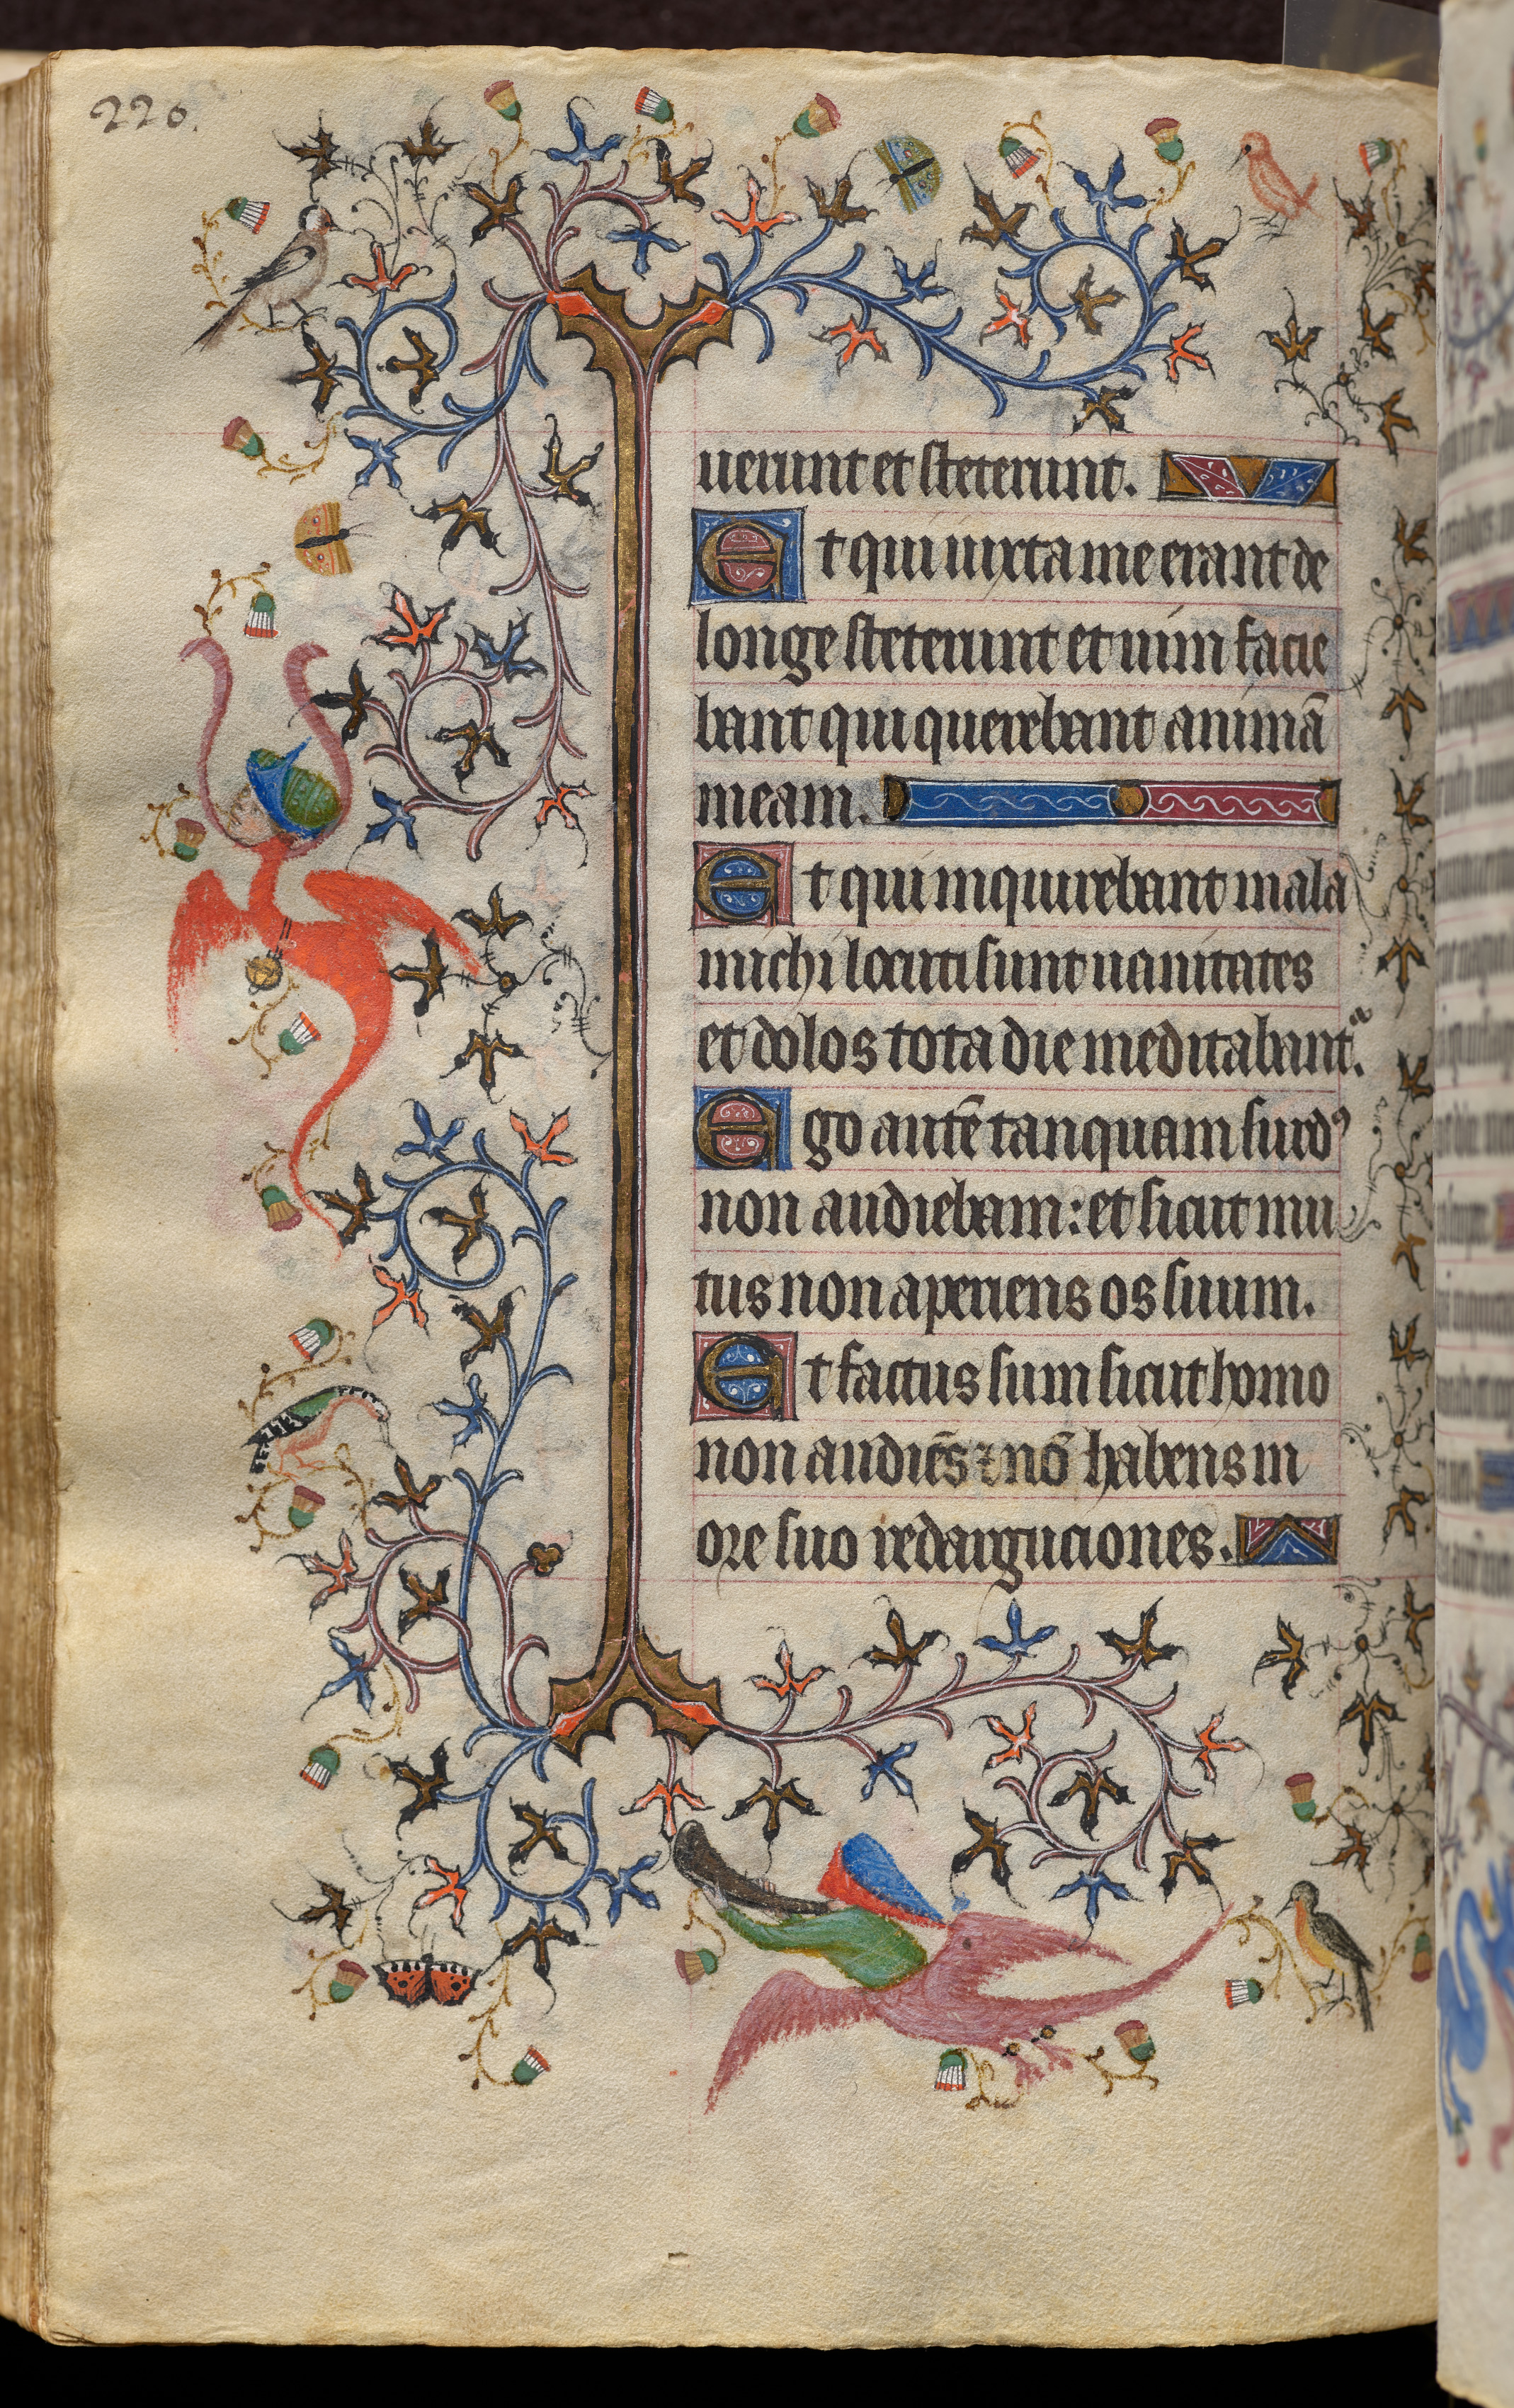 Hours of Charles the Noble, King of Navarre (1361-1425): fol. 110v, Text